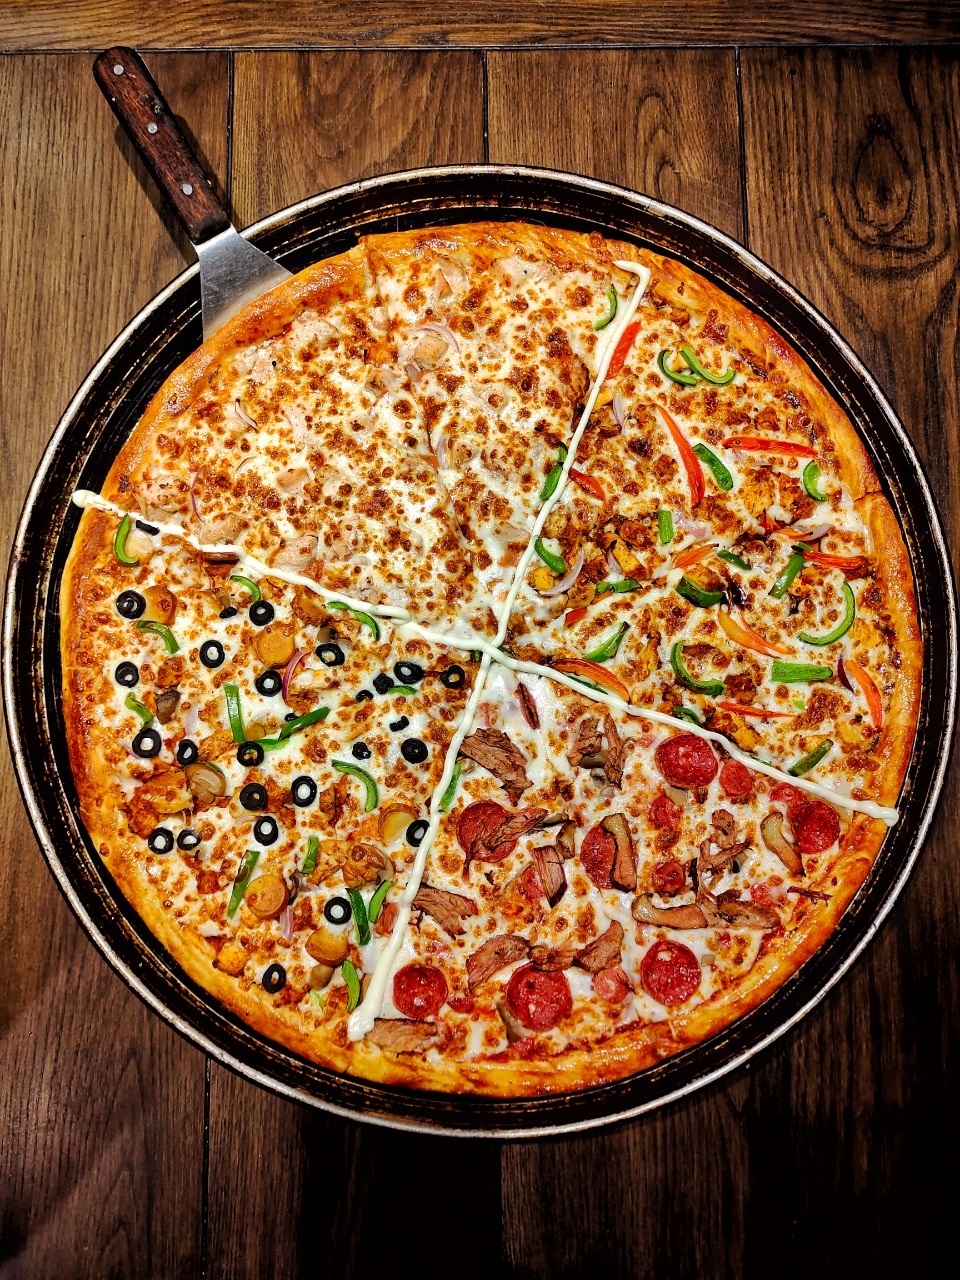 Pakistan’s Own NY212 Pizza Chain Focuses on Holistic Halal Concept